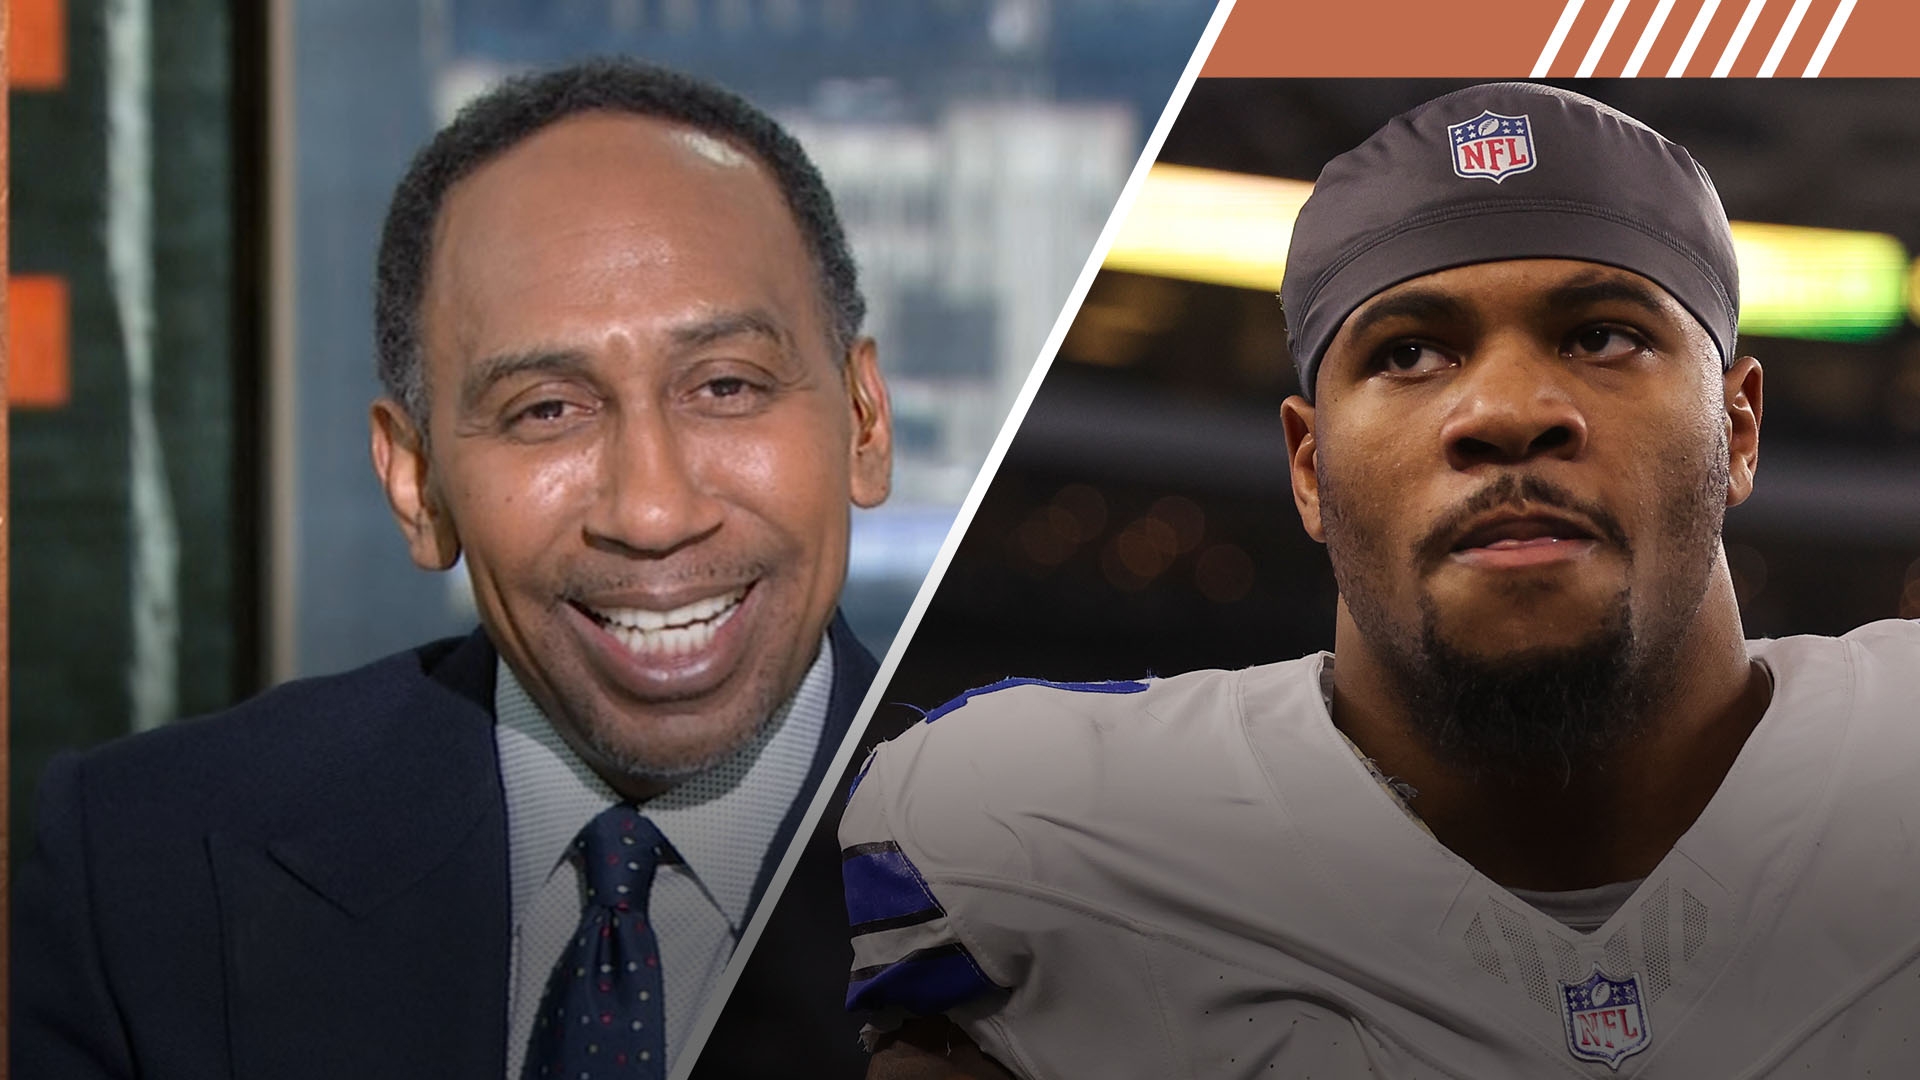 Stephen A. laughs at Cowboys after Eagles draft promising corner